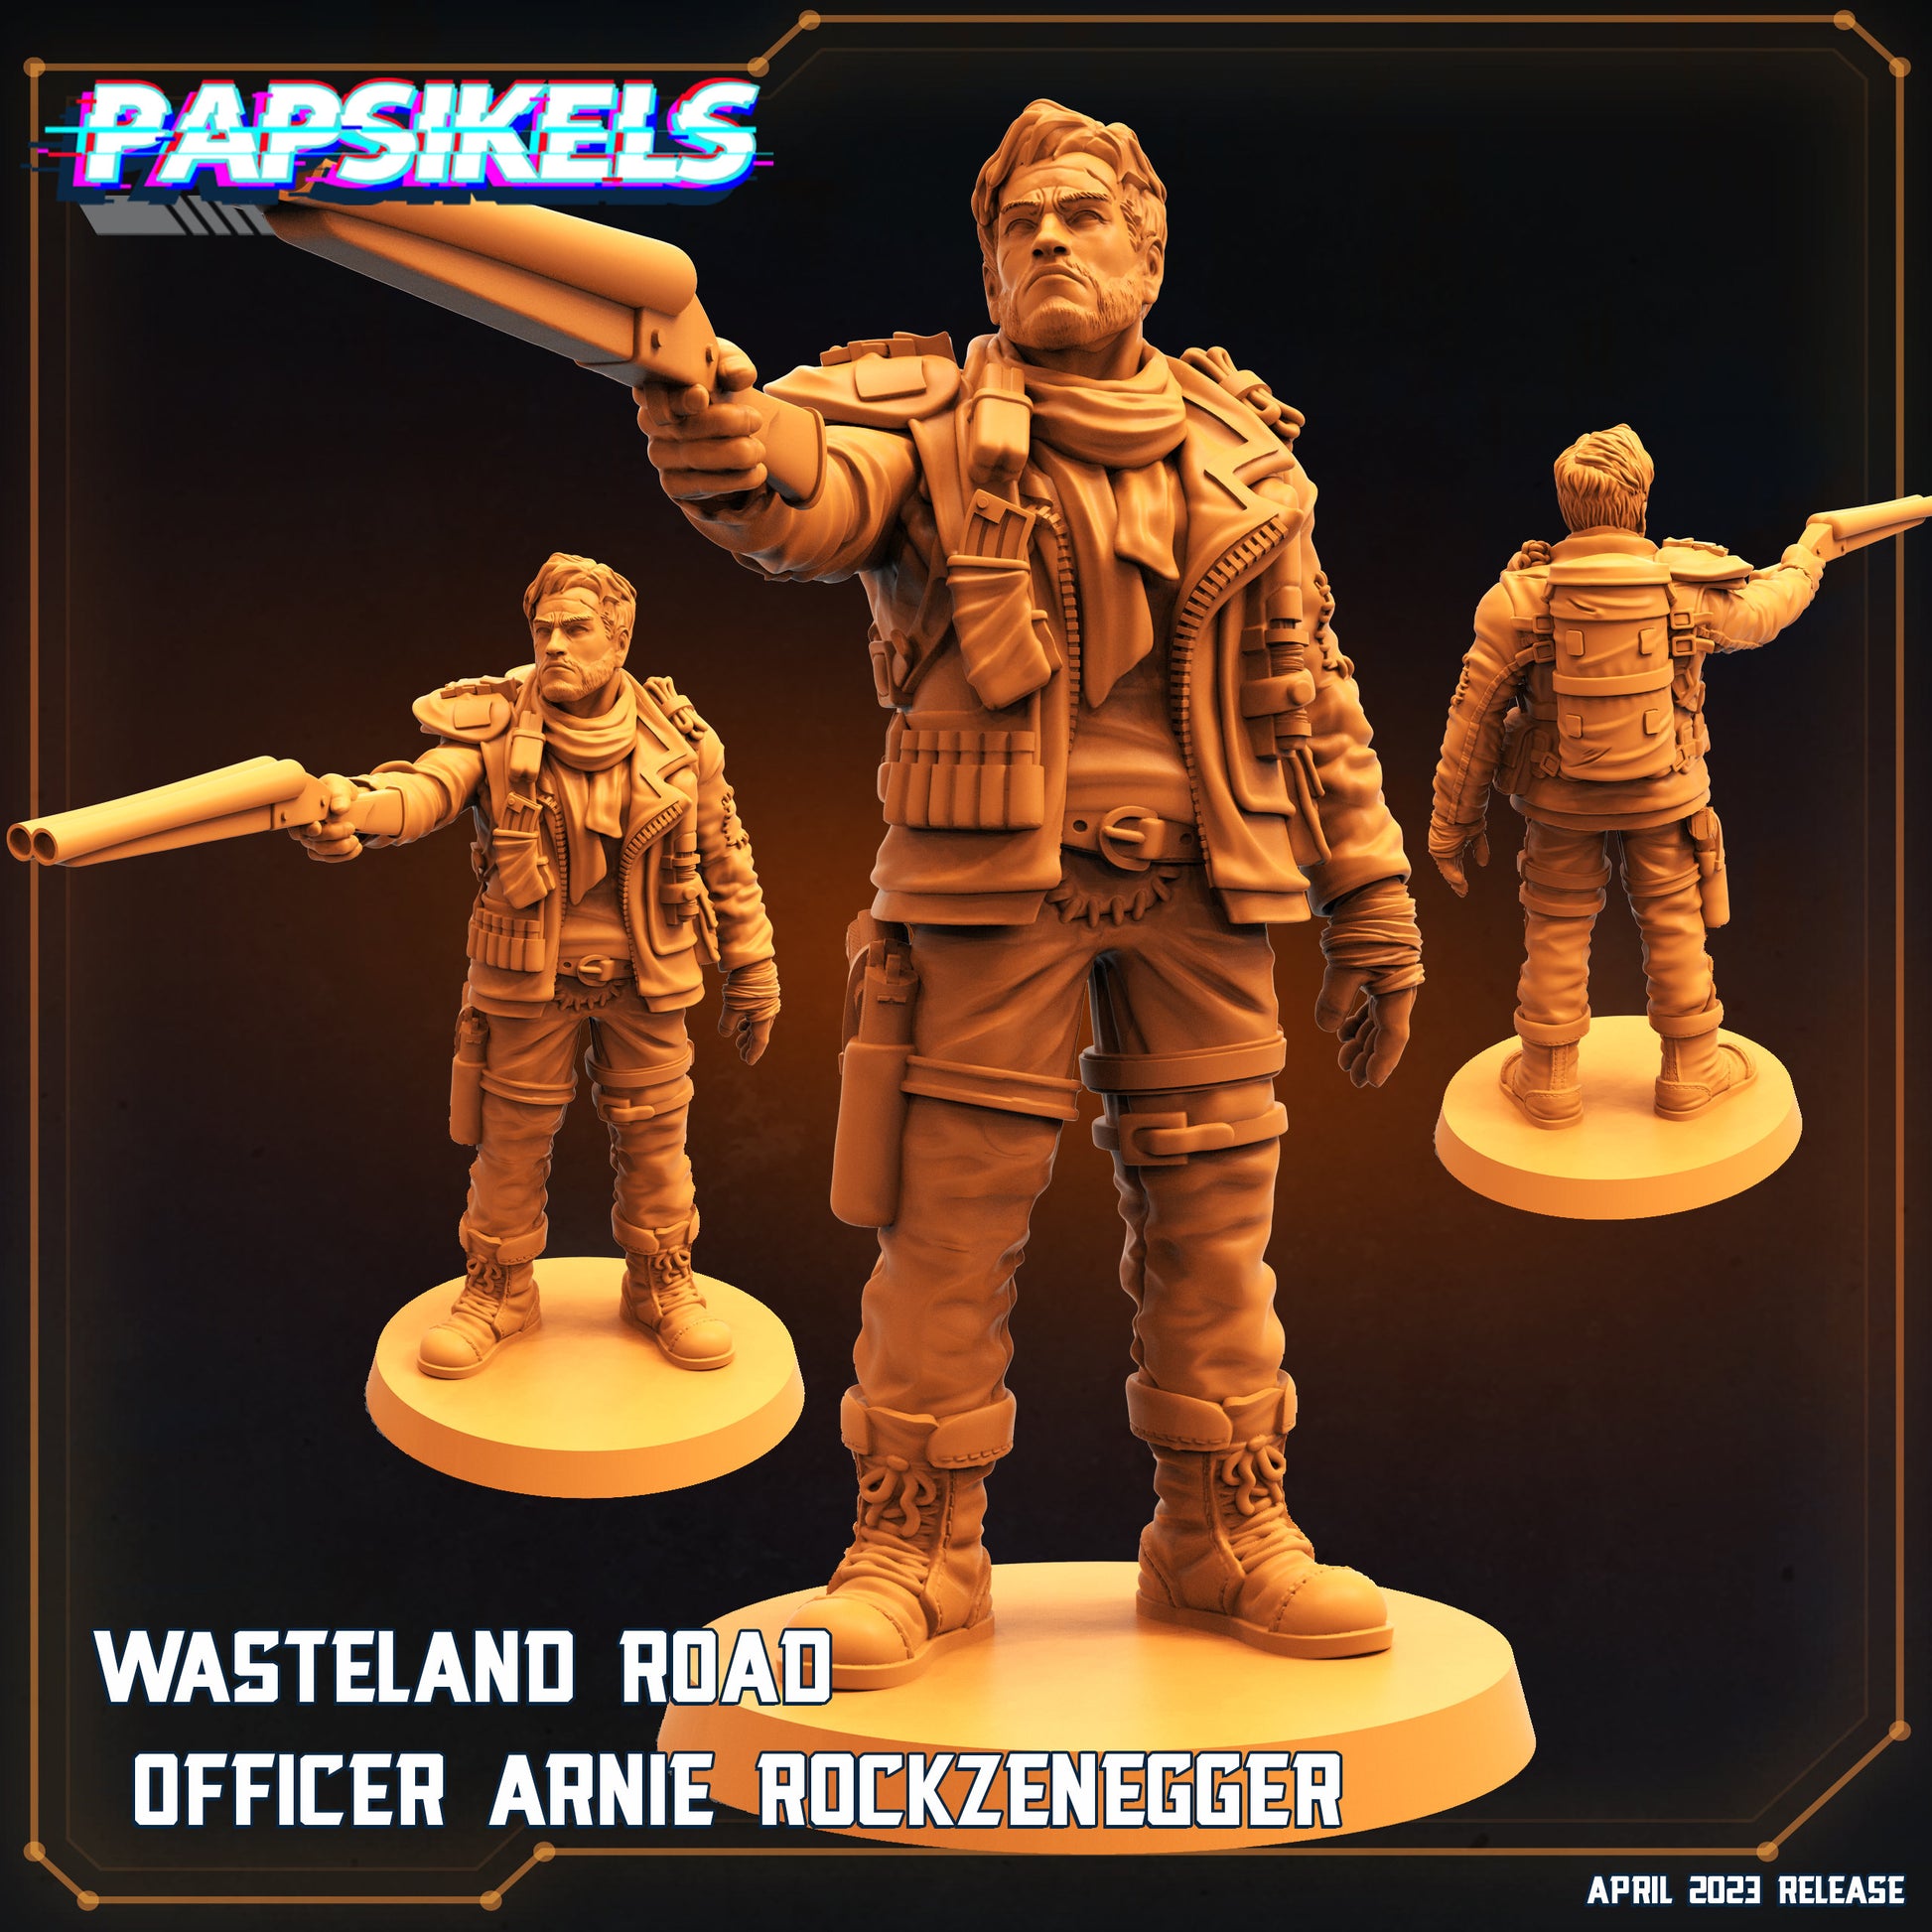 Wasteland Road Officer Arnie Rockzenegger (sculpted by Papsikels)